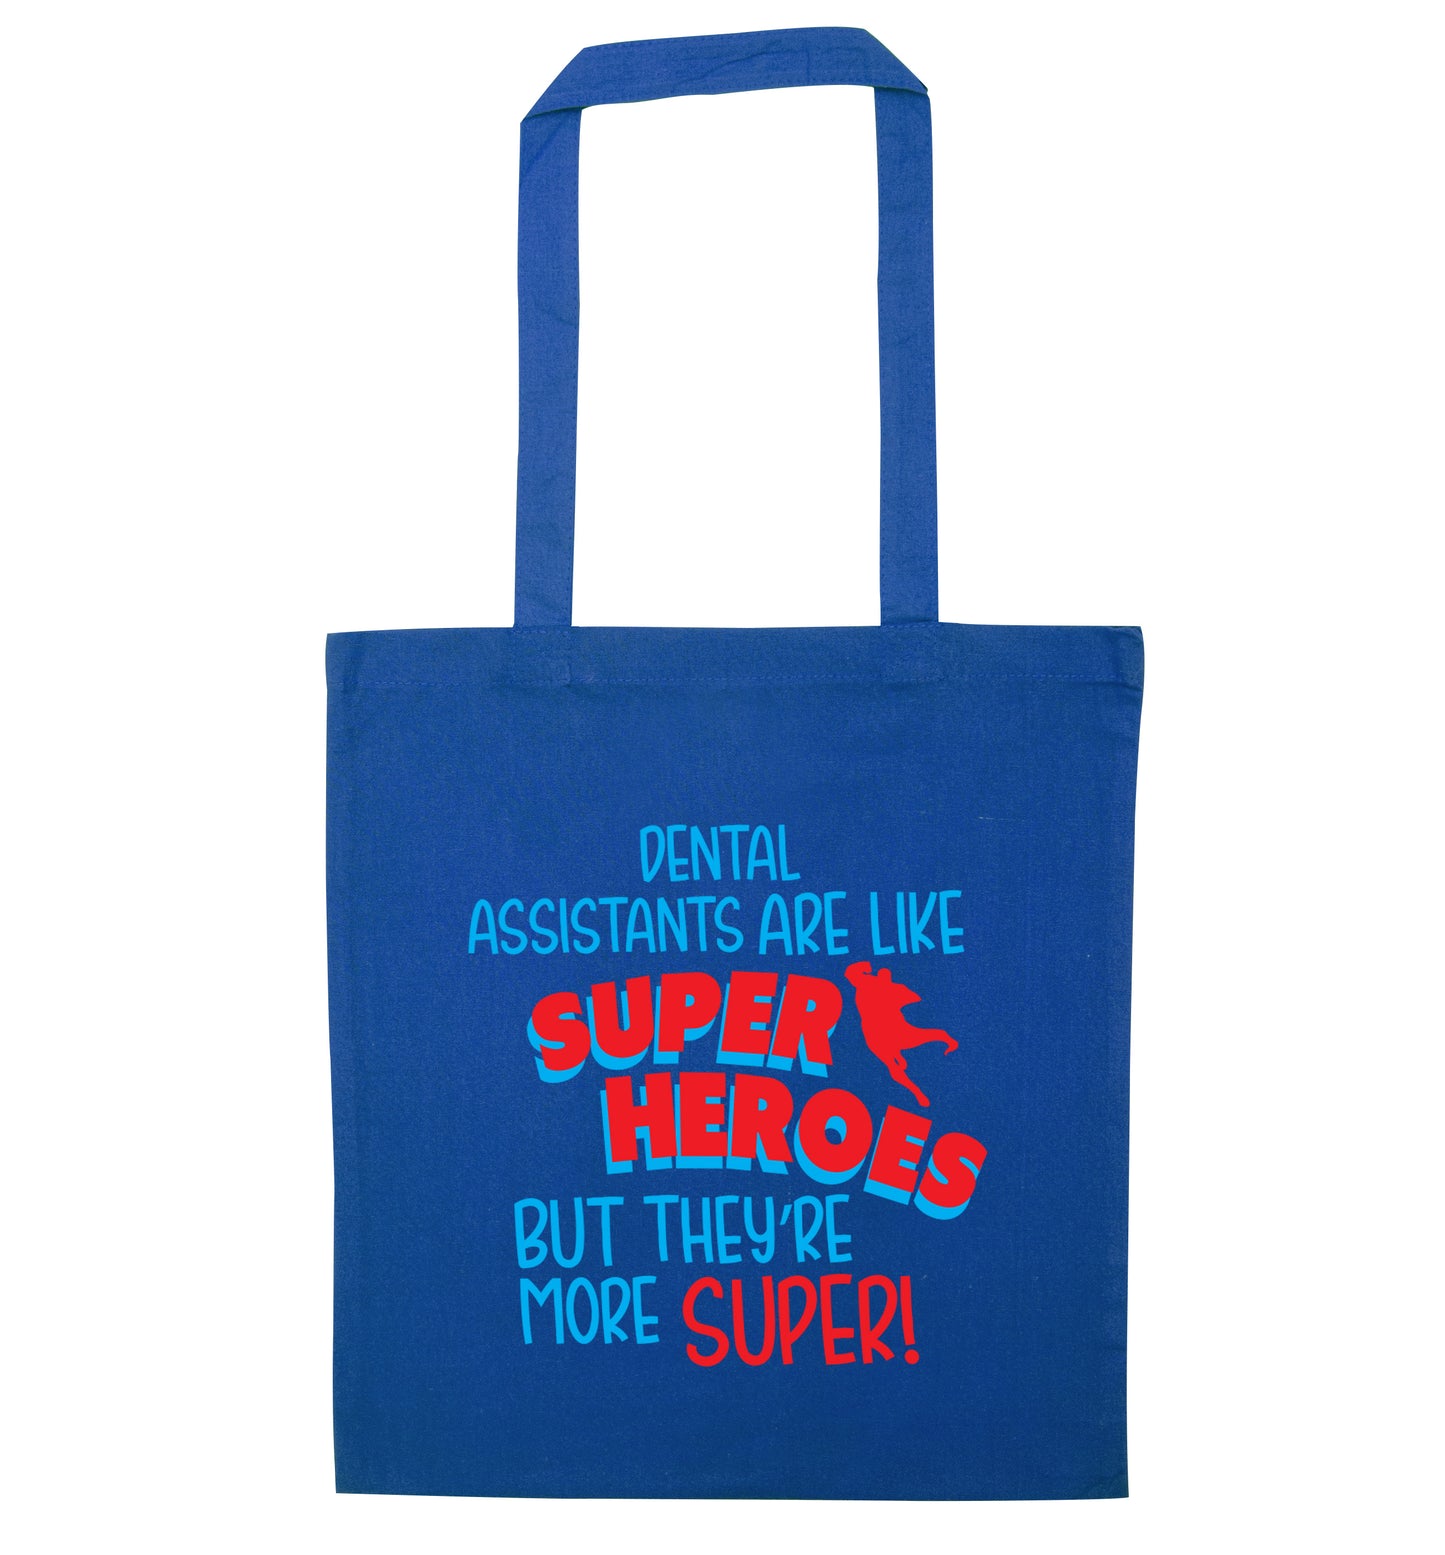 Dental Assistants are like superheros but they're more super blue tote bag